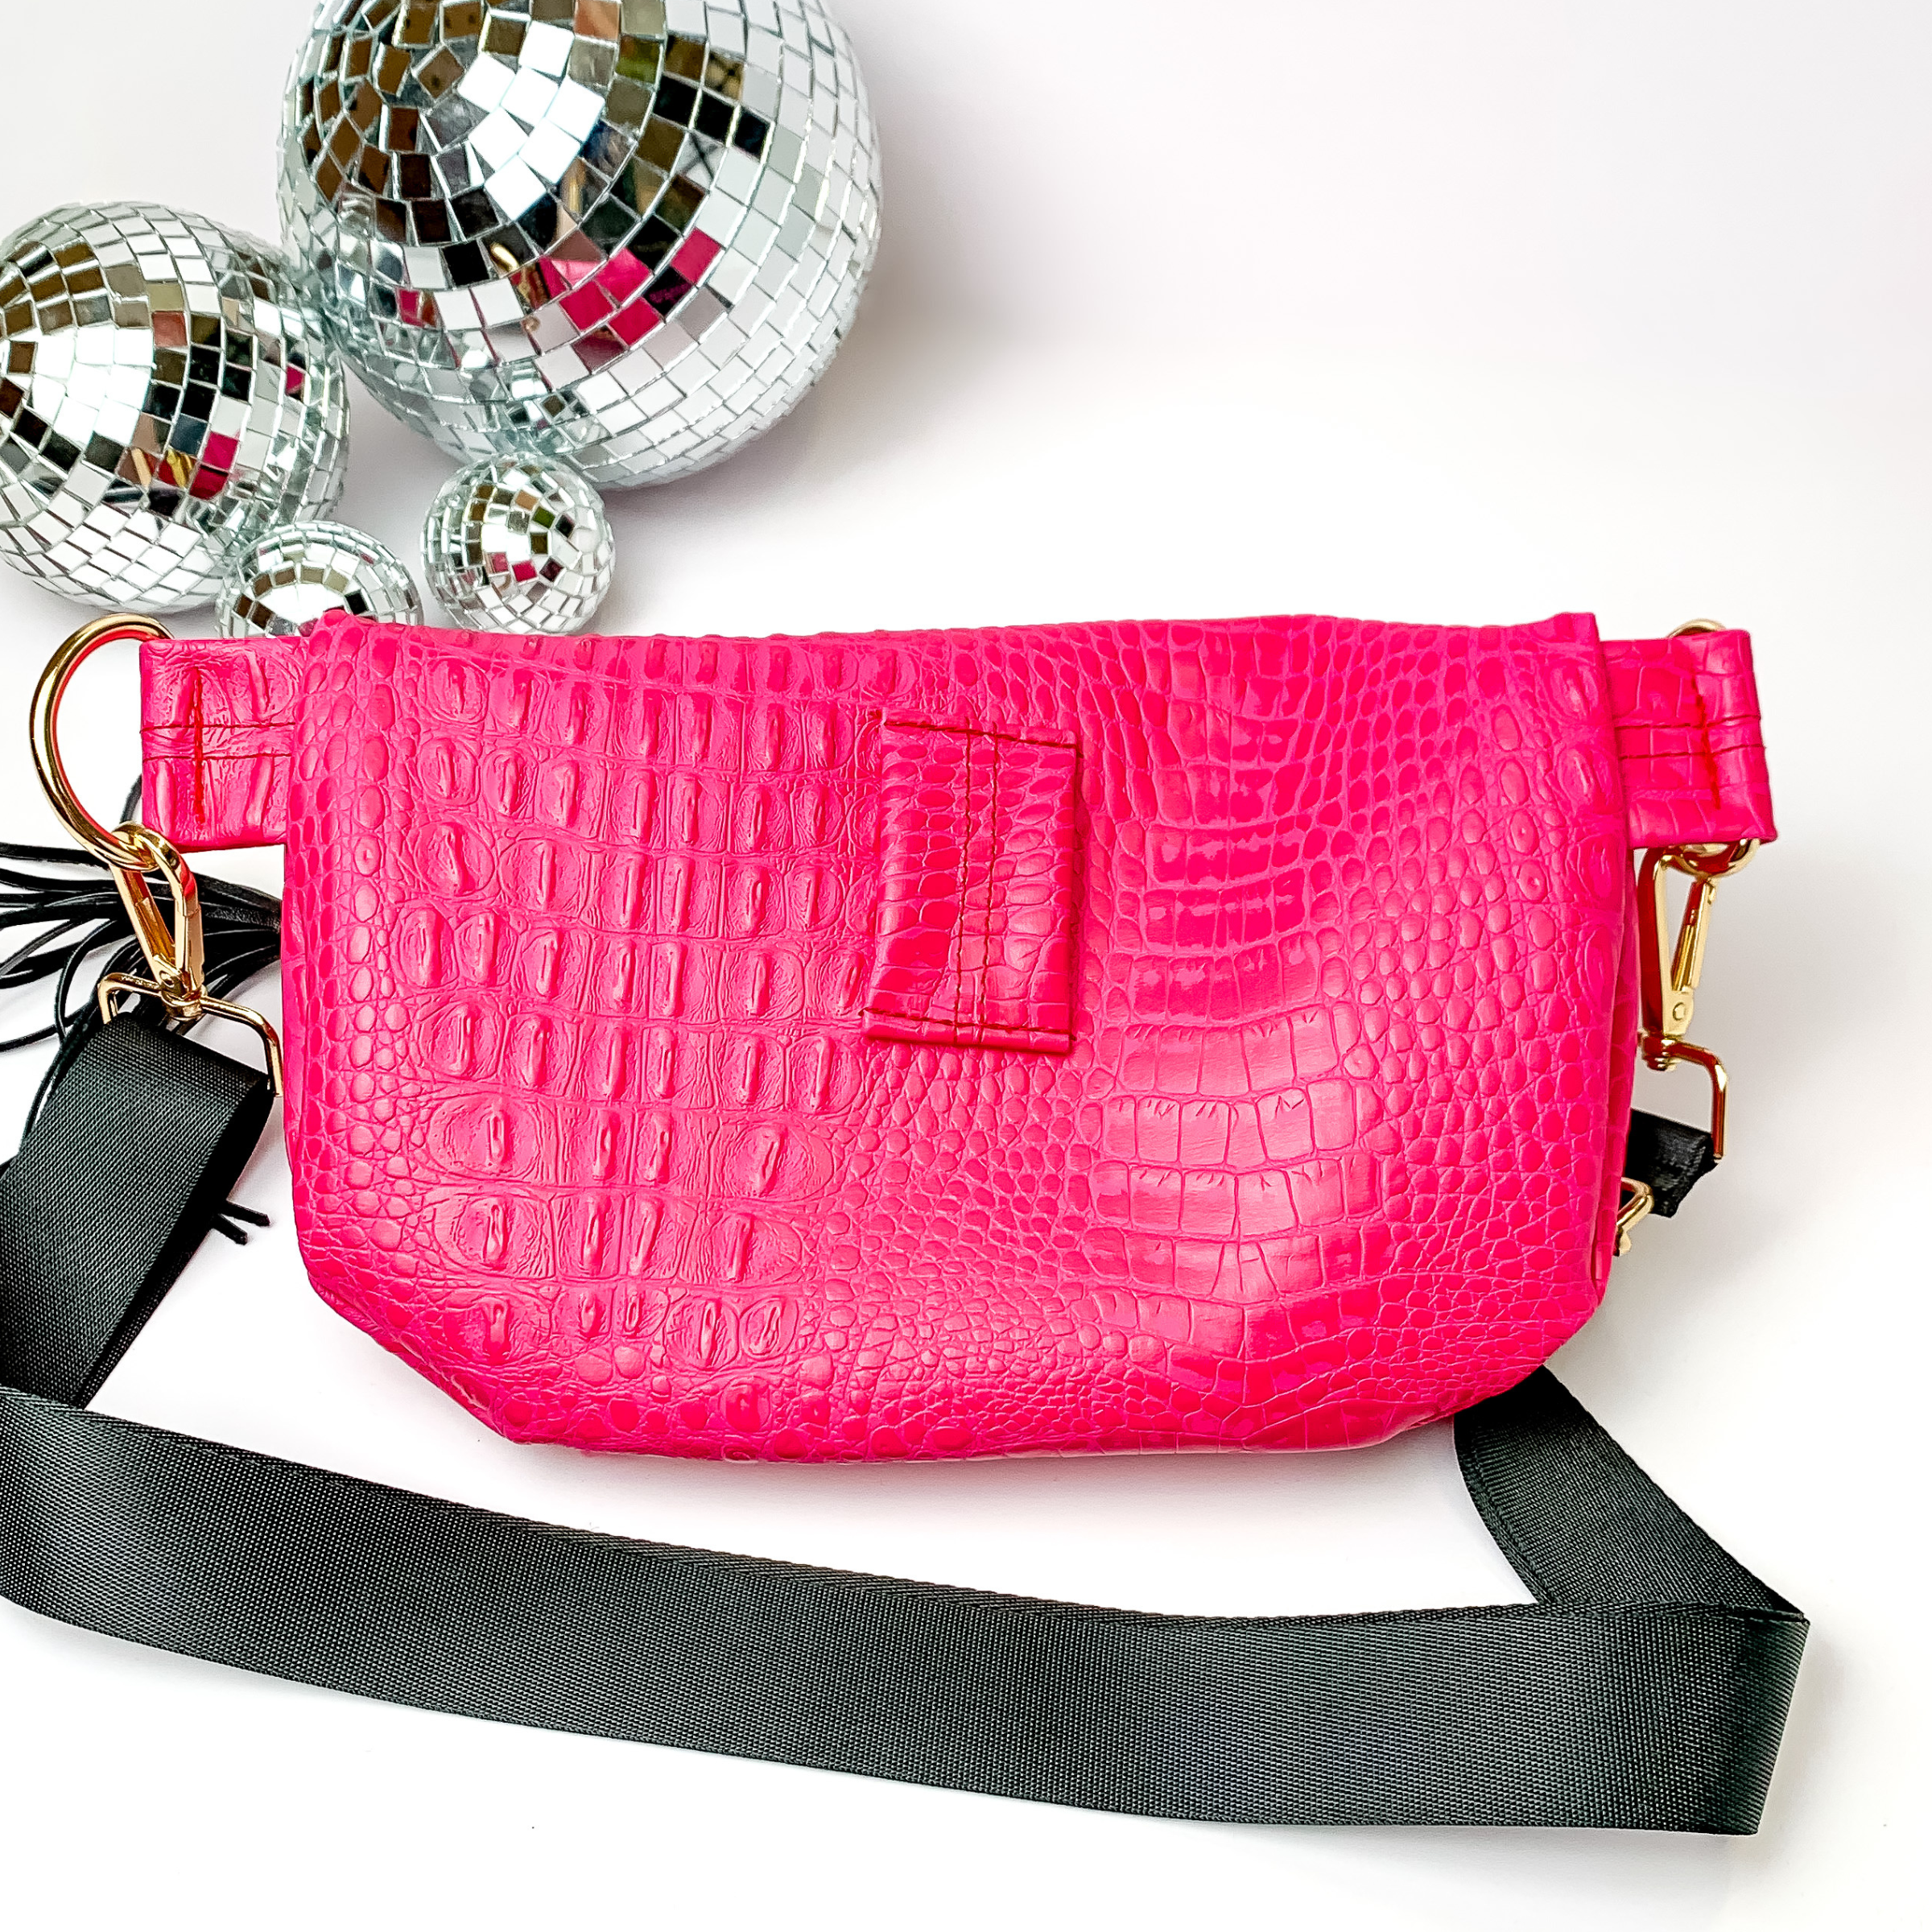 Makeup Junkie | Dolly Sidekick with Adjustable Strap in Hot Pink Croc Print - Giddy Up Glamour Boutique